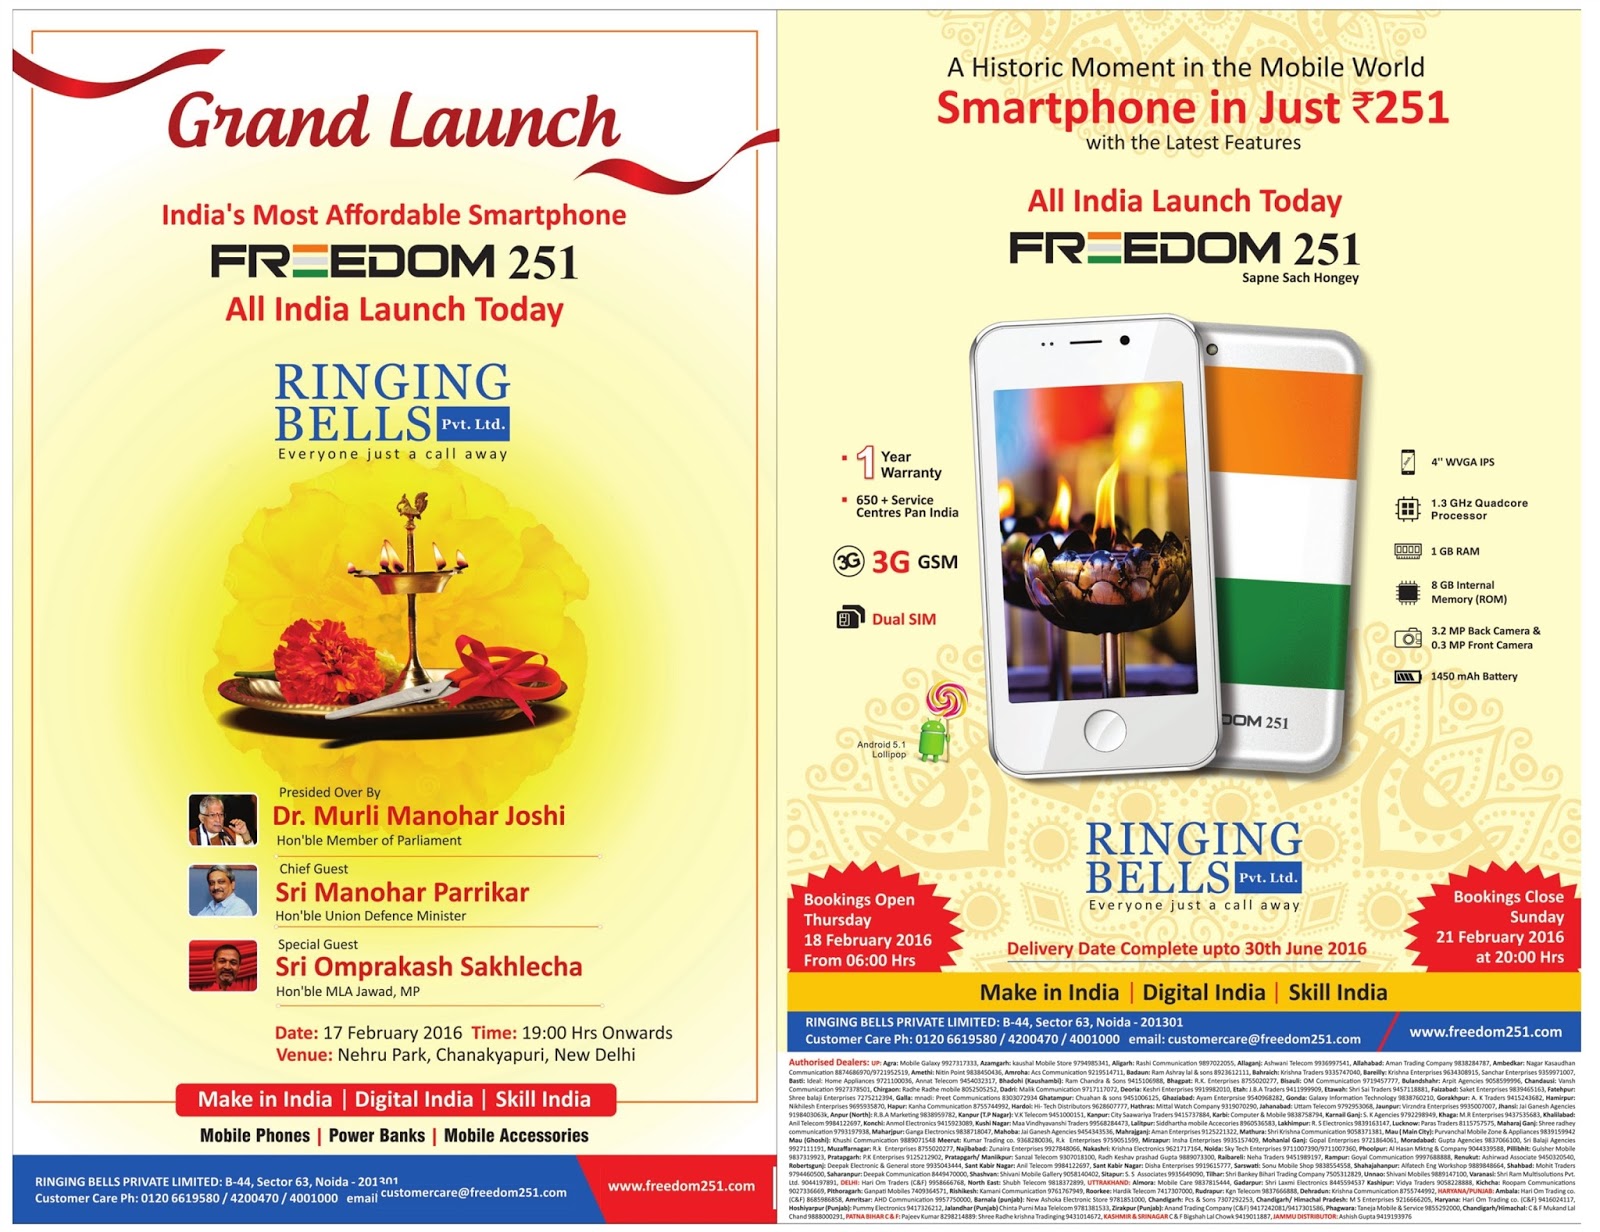 Ringing Bells Freedom 251 With $4 Price Tag Is Worldâ€™s Cheapest  Smartphone - Mobile57 Af